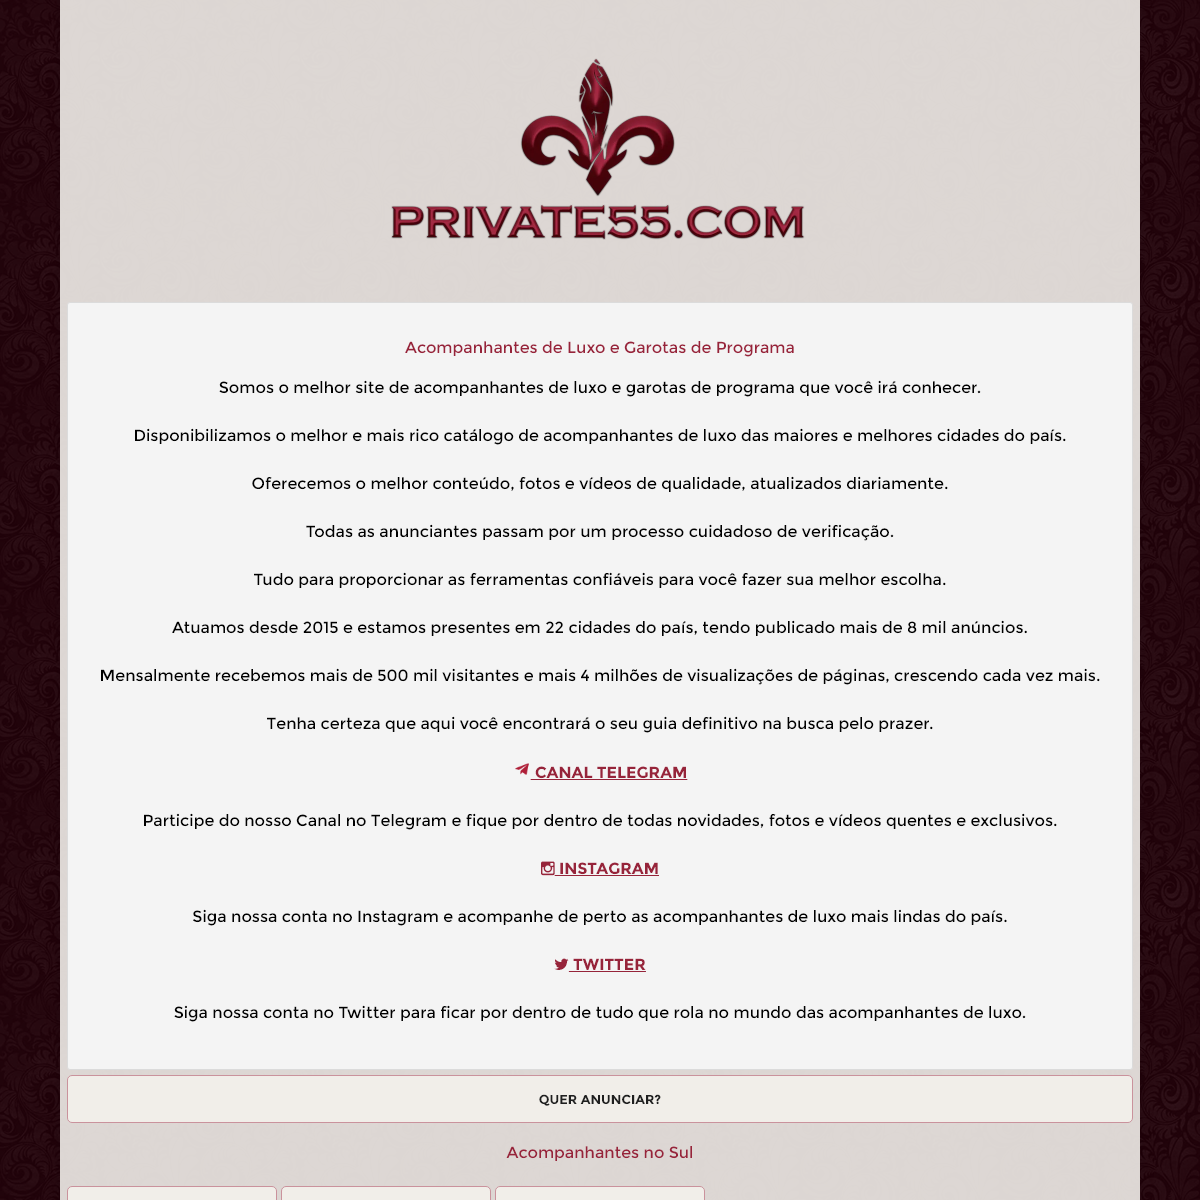 A complete backup of www.www.private55.com